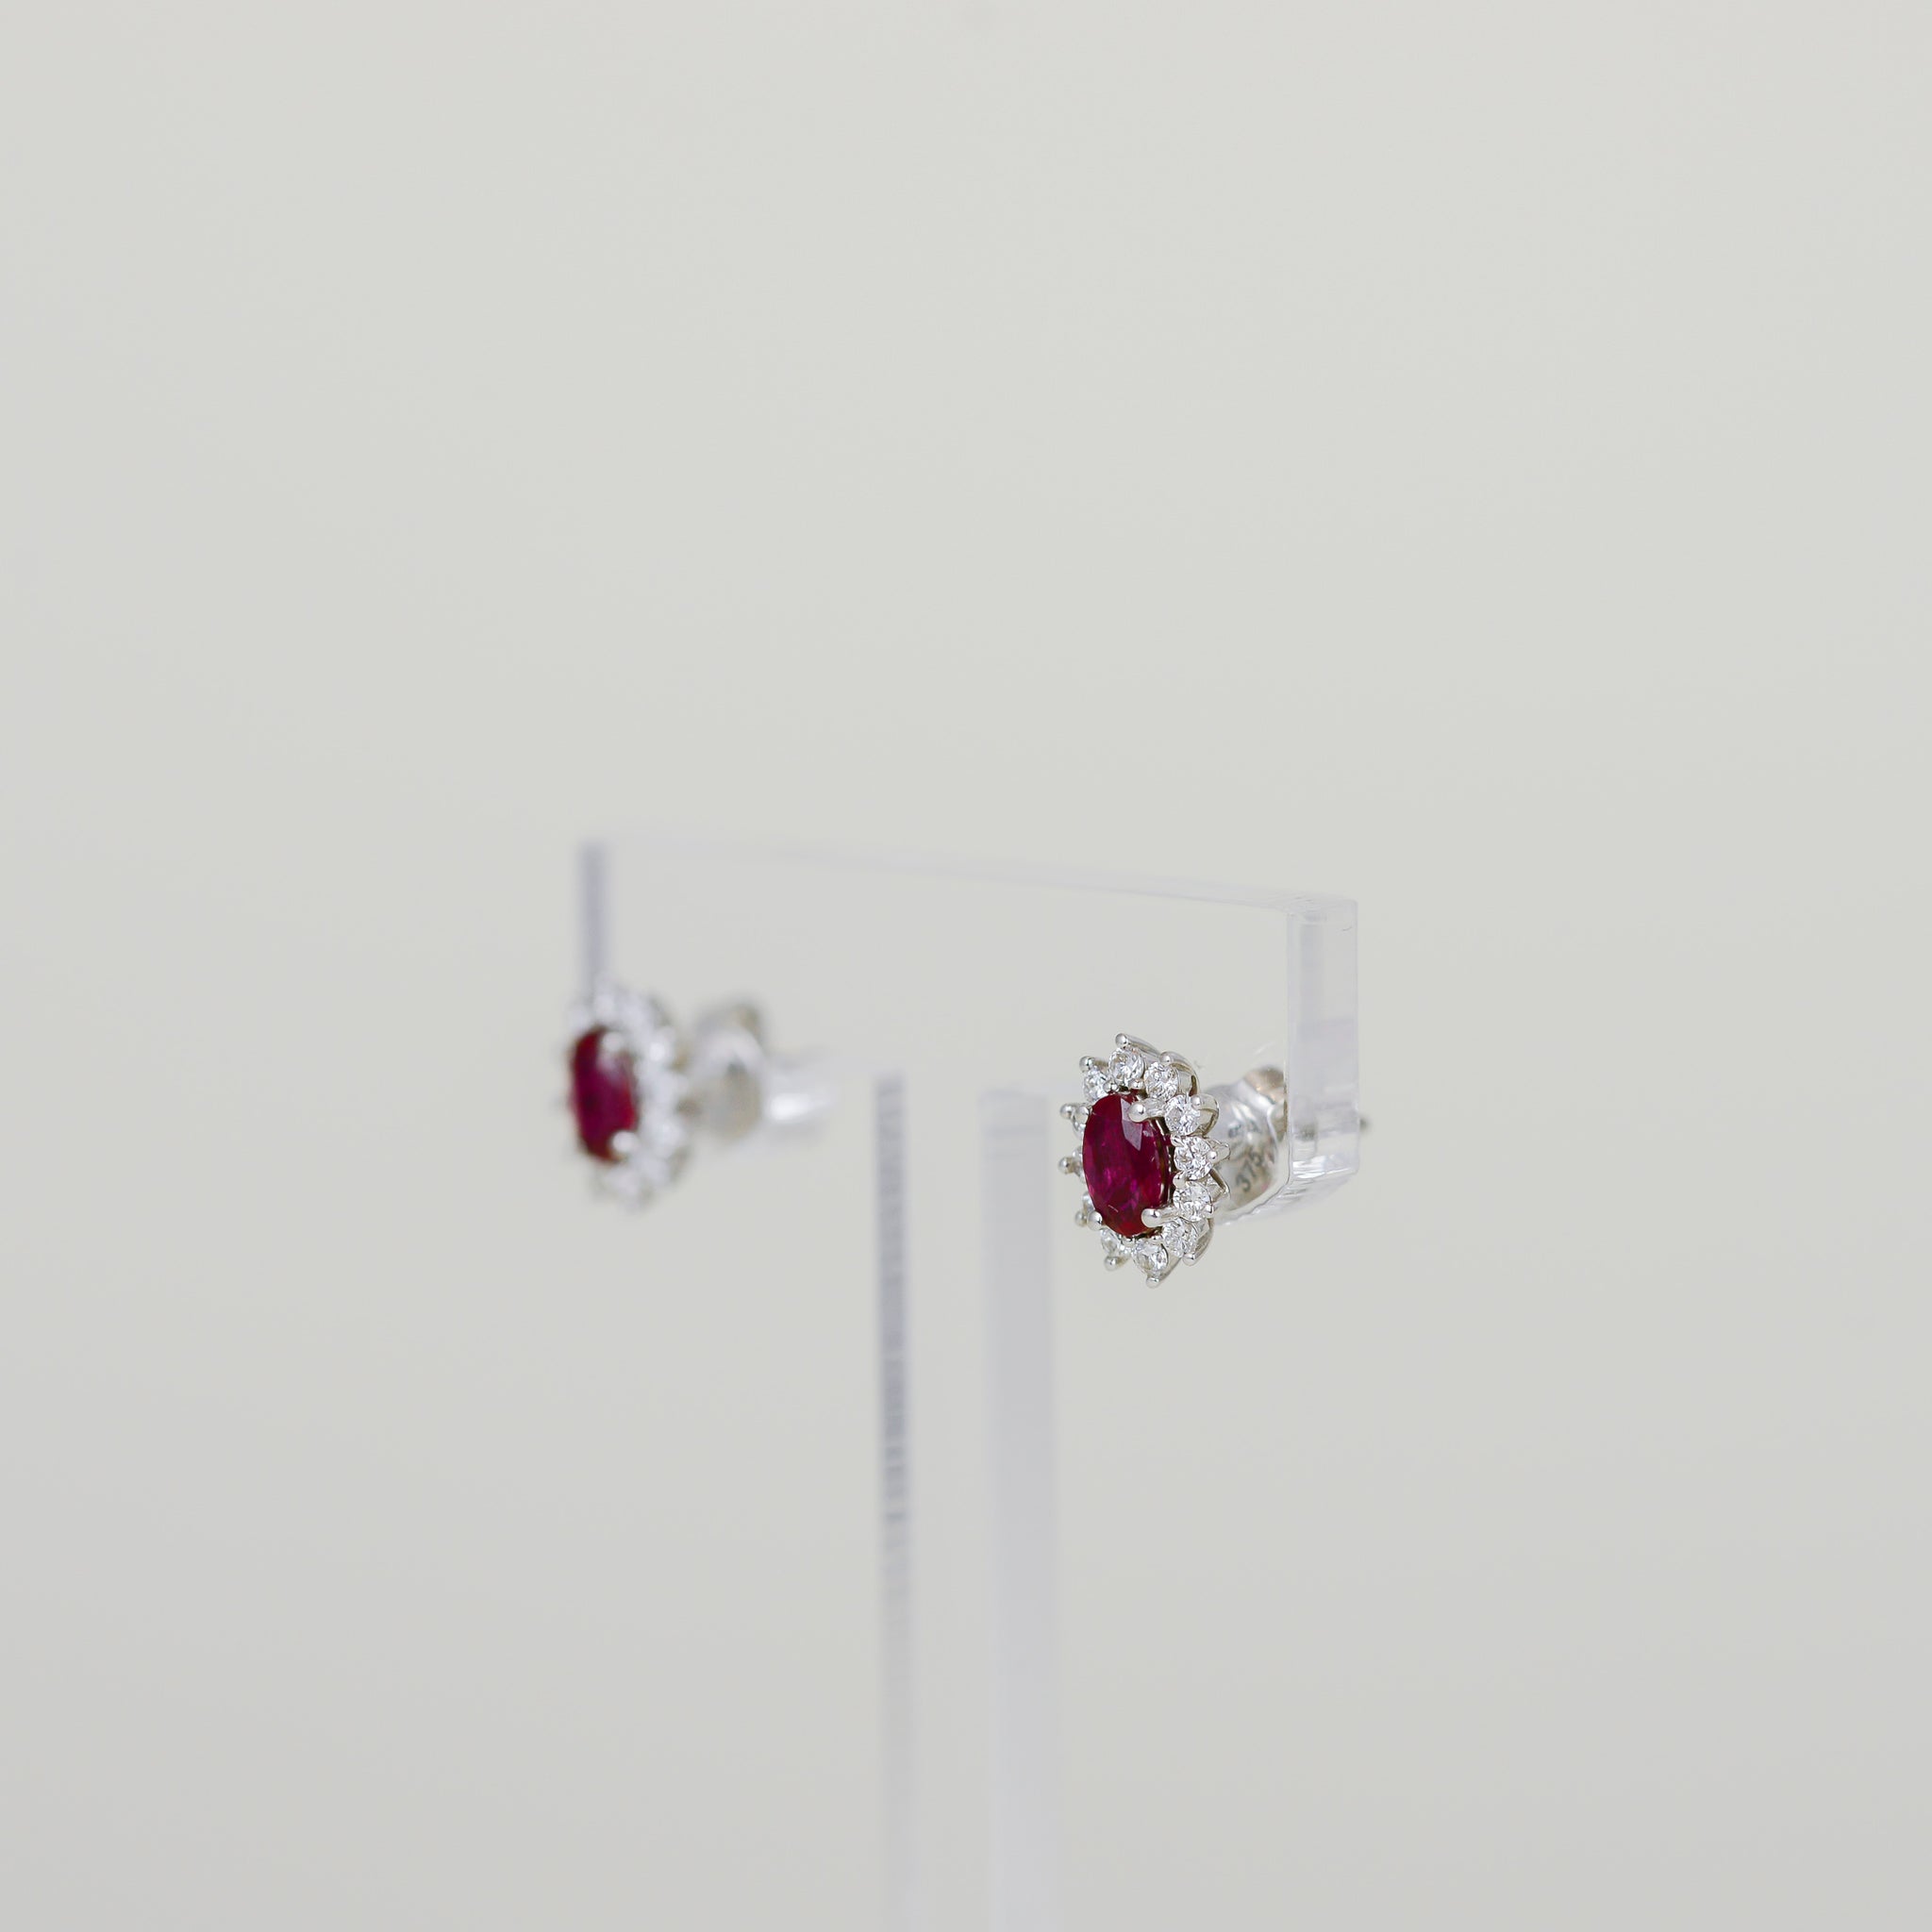 9ct White Gold 0.55ct Oval Ruby and Diamond Cluster Earrings